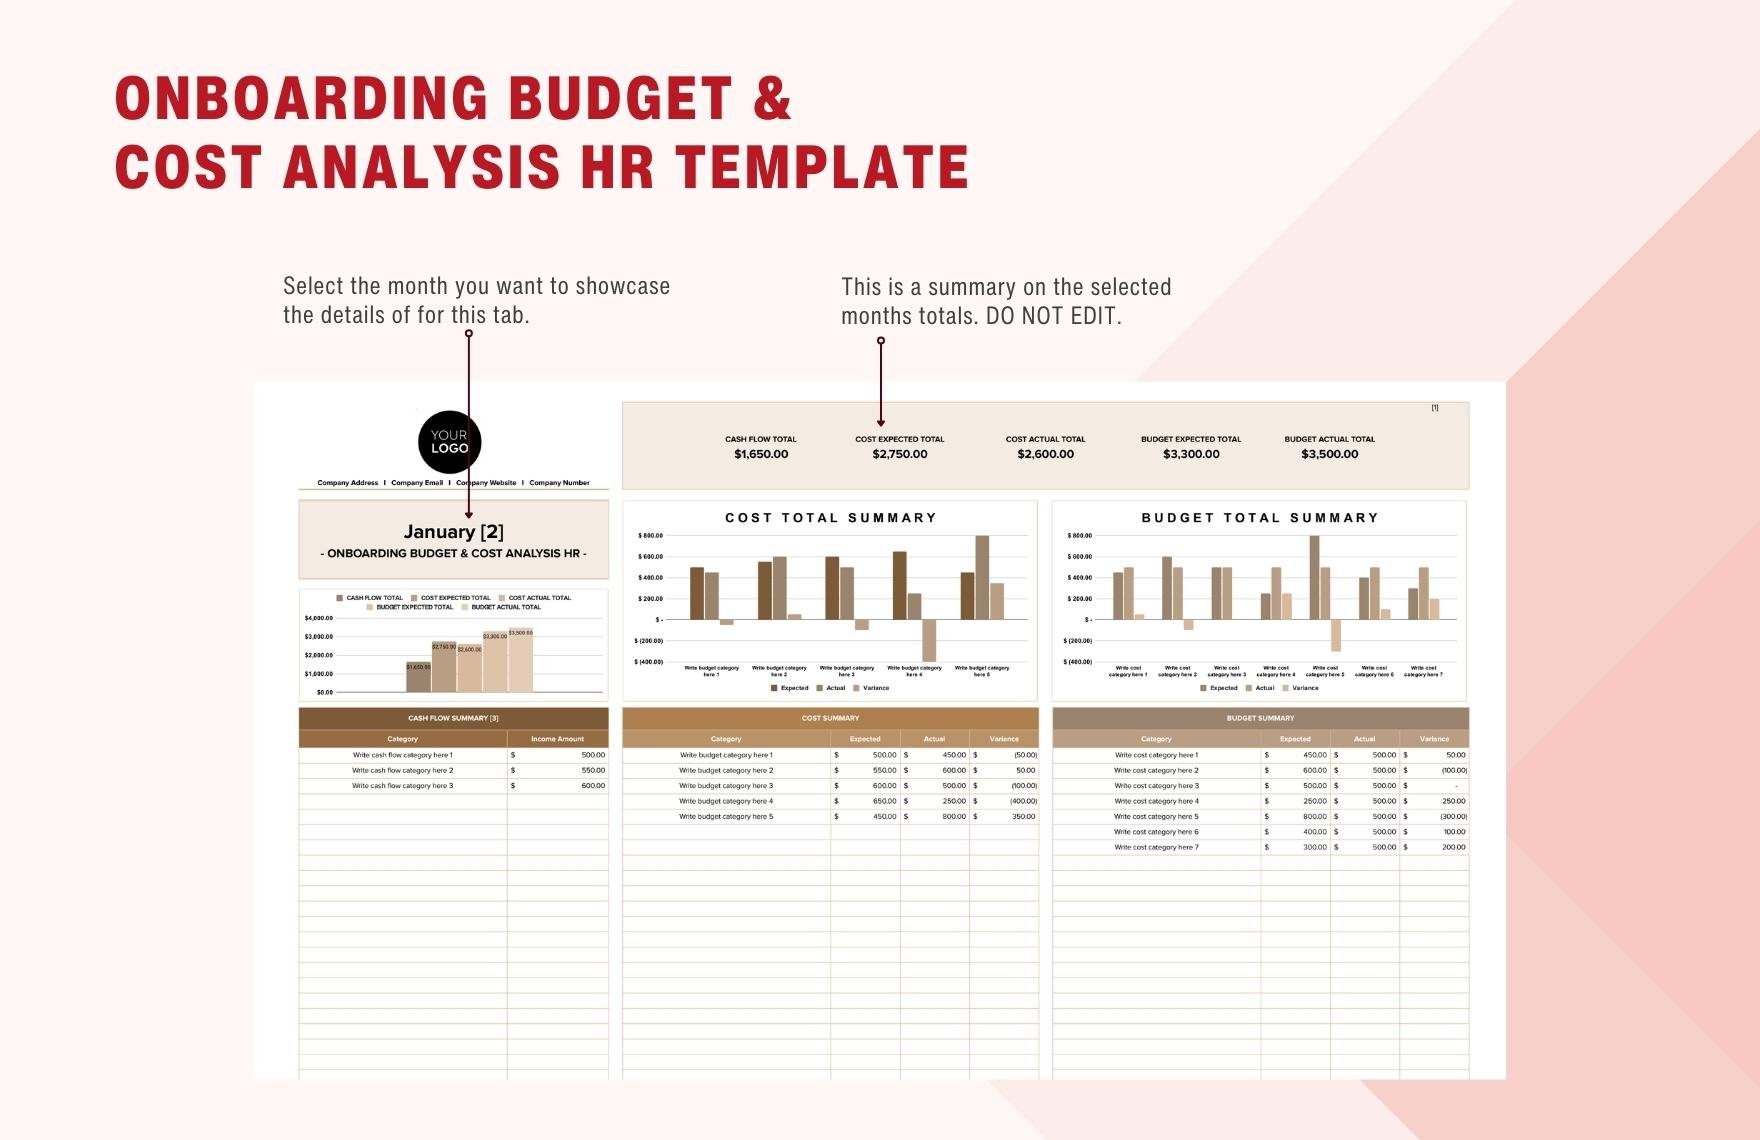 Onboarding Budget & Cost Analysis HR Template